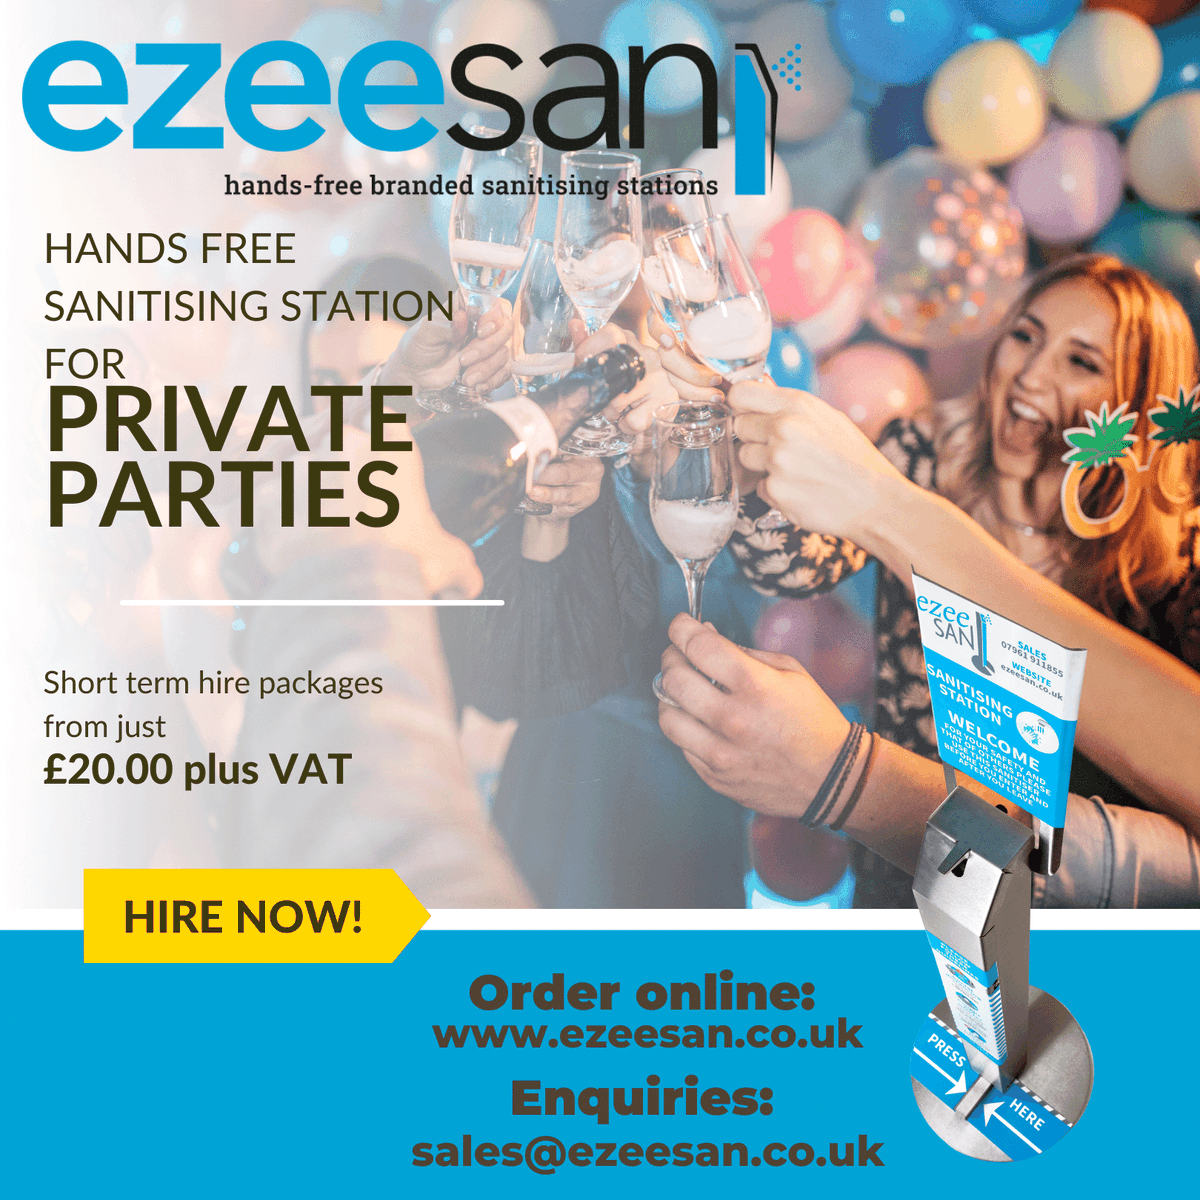 Impress your guests!
Private parties made safer and much more enjoyable with peace of mind.
 #sanitisers #healthyandsafety #birthday #occassion #specialoccassion  #companyparty #events  #parties #celebration #disinfectant #covid #covid19 #ezee #ezeesan #ezeesanhandsfree